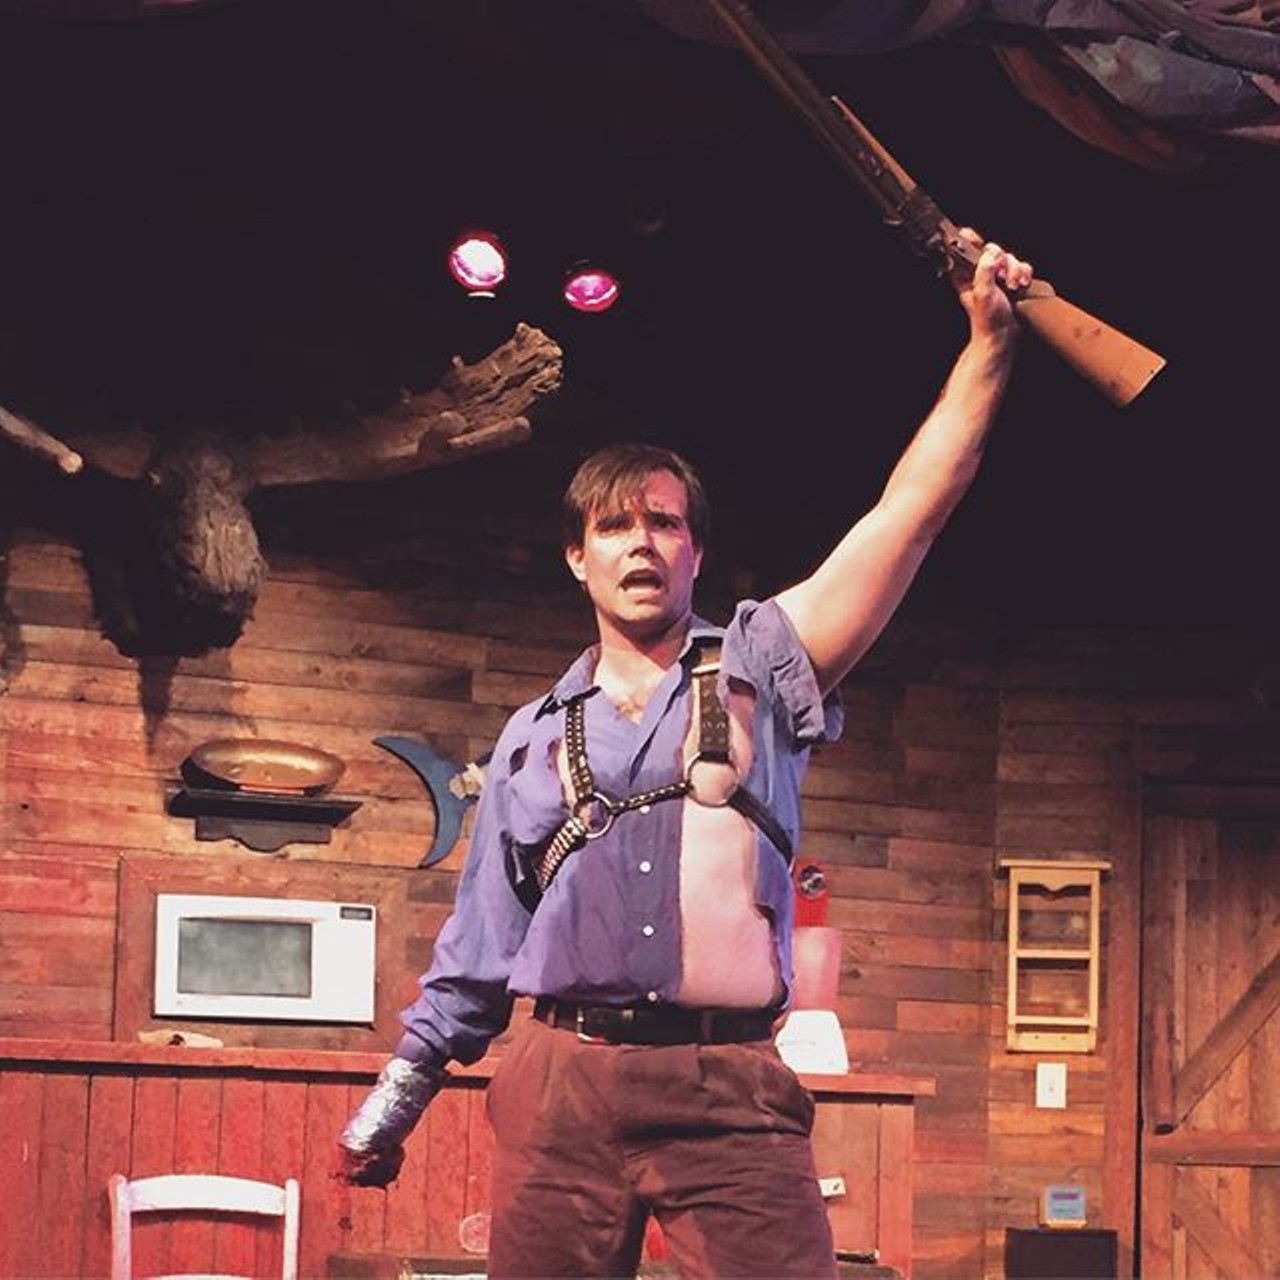 Evil Dead the Musical at Playhouse Square | 1501 Euclid Ave
Campy, gory and monster-filled, Evil Dead, the Musical is a horror fan's dream. Based on the cult classic monster flick Evil Dead, this parody is far from scary, though it still brings on the Halloween vibes. (Photo courtesy of Instagram user @thehutchabides)